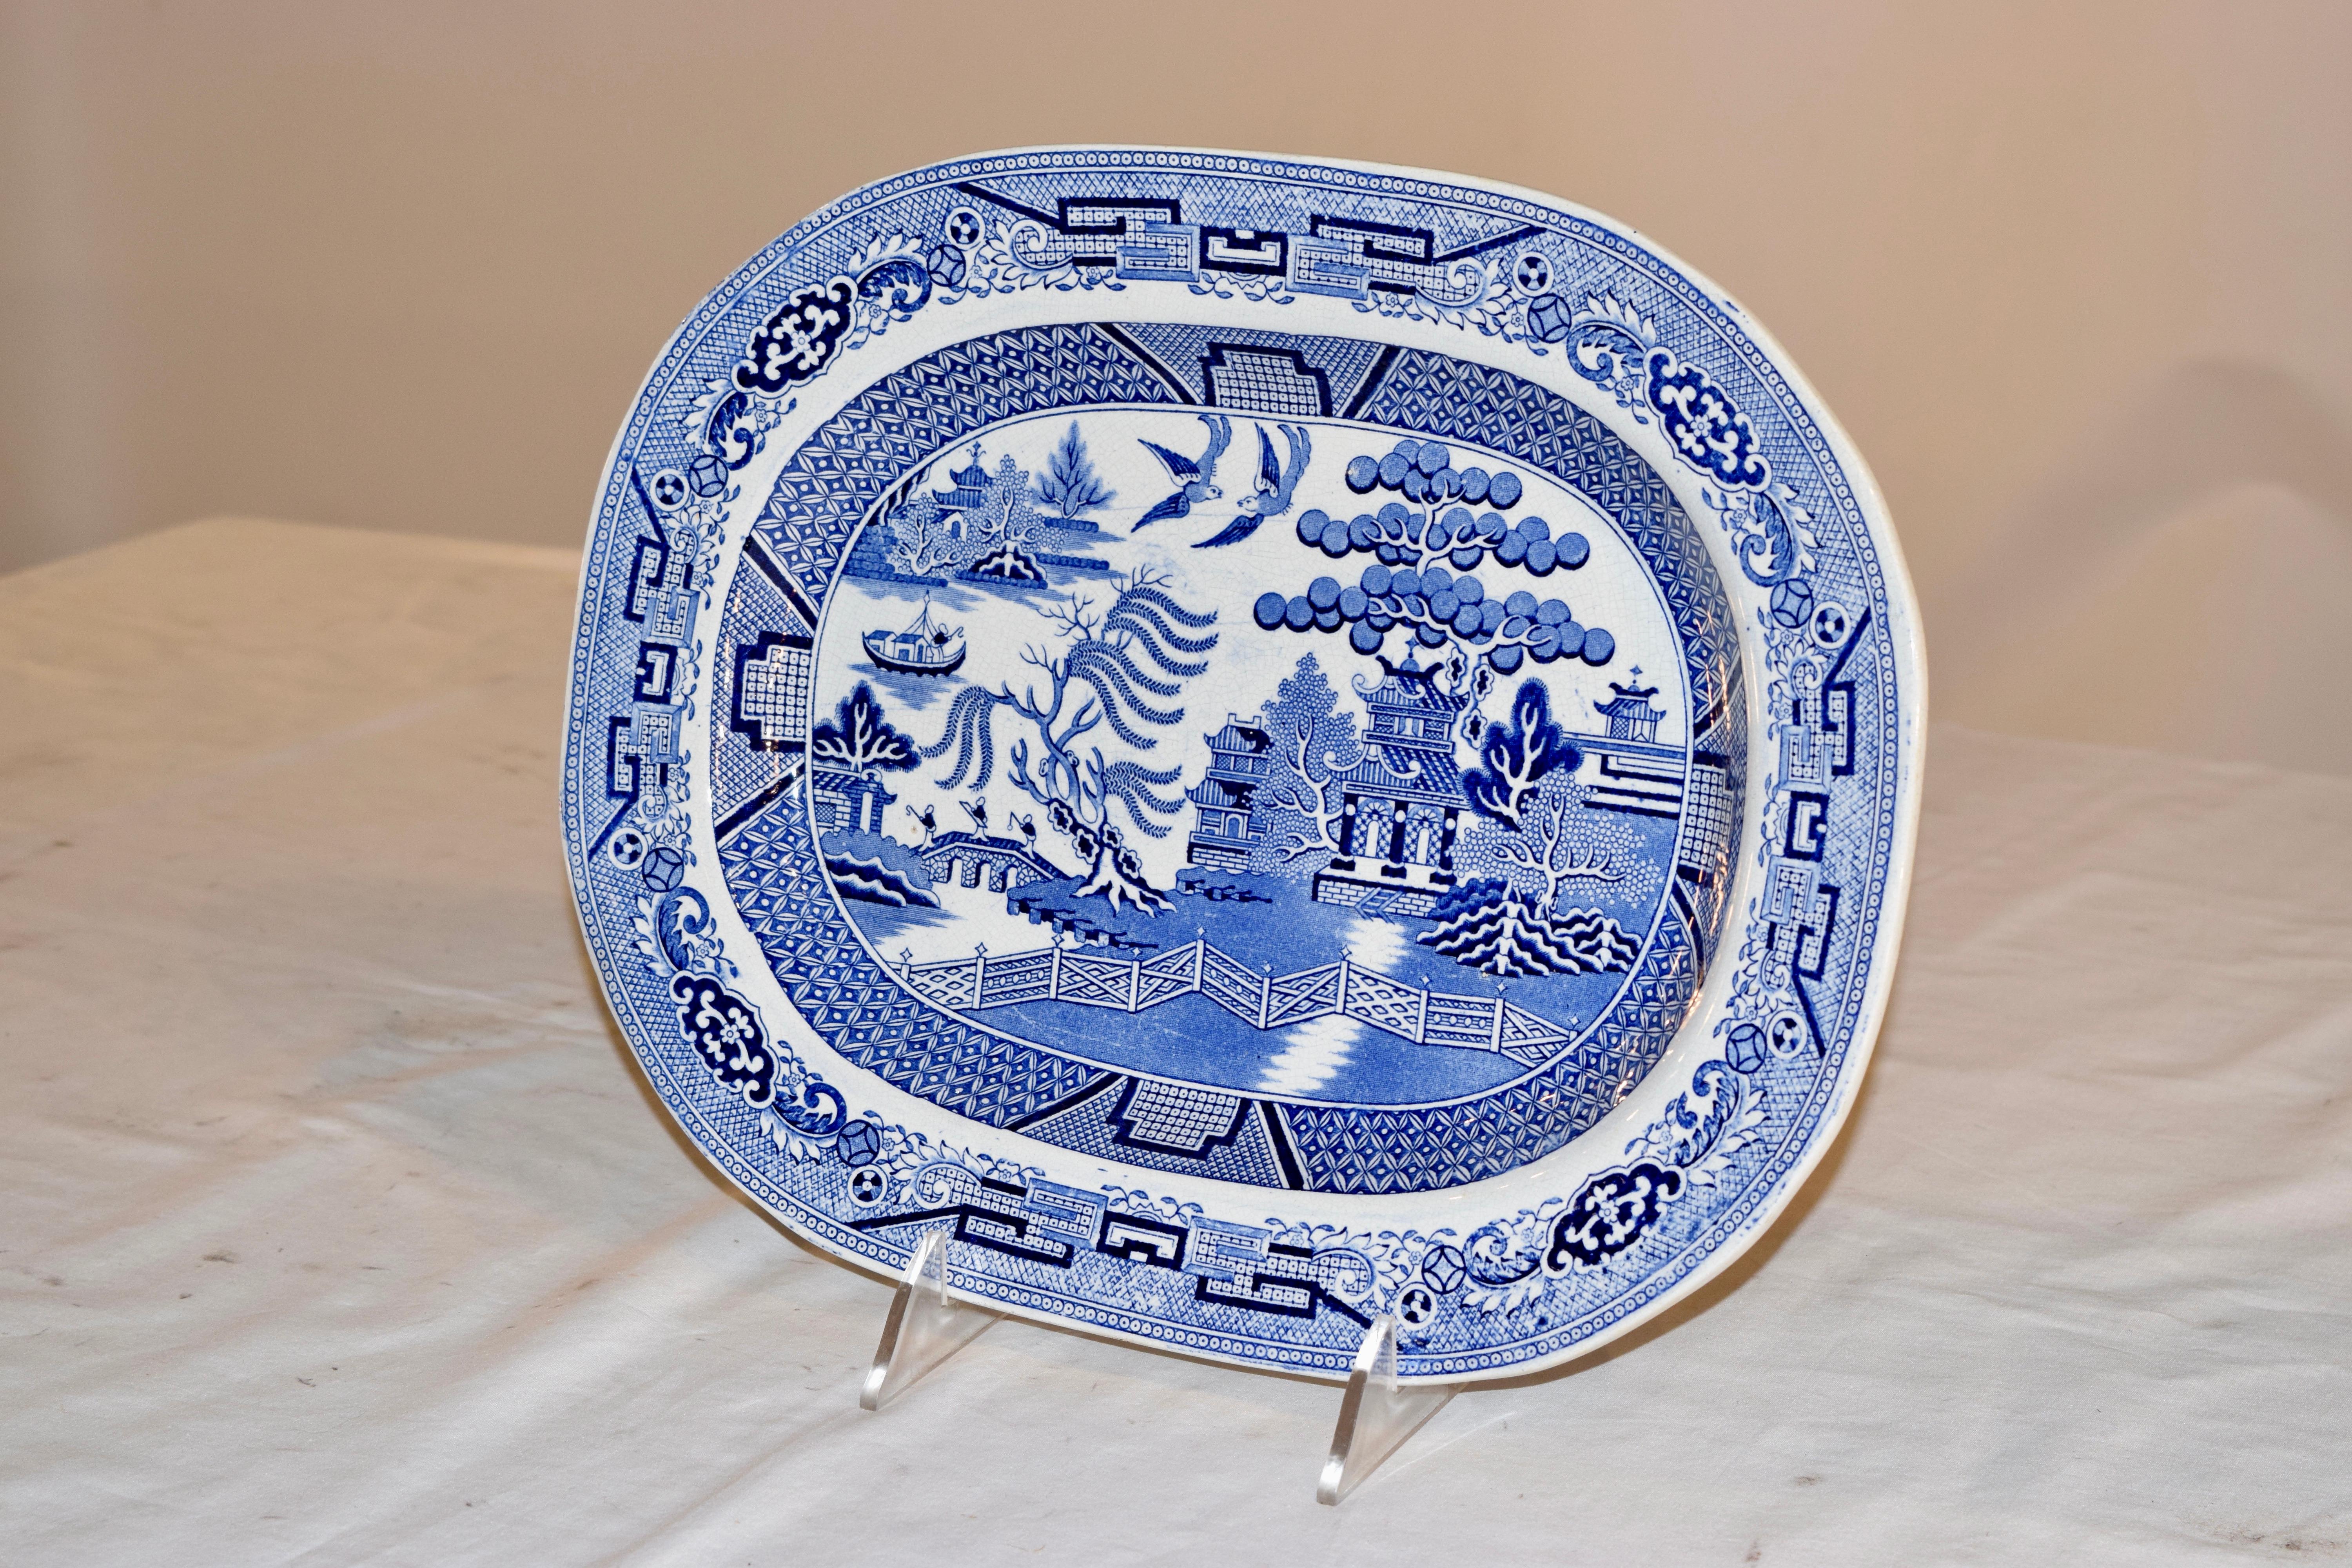 19th century Staffordshire platter in the highly collectible 